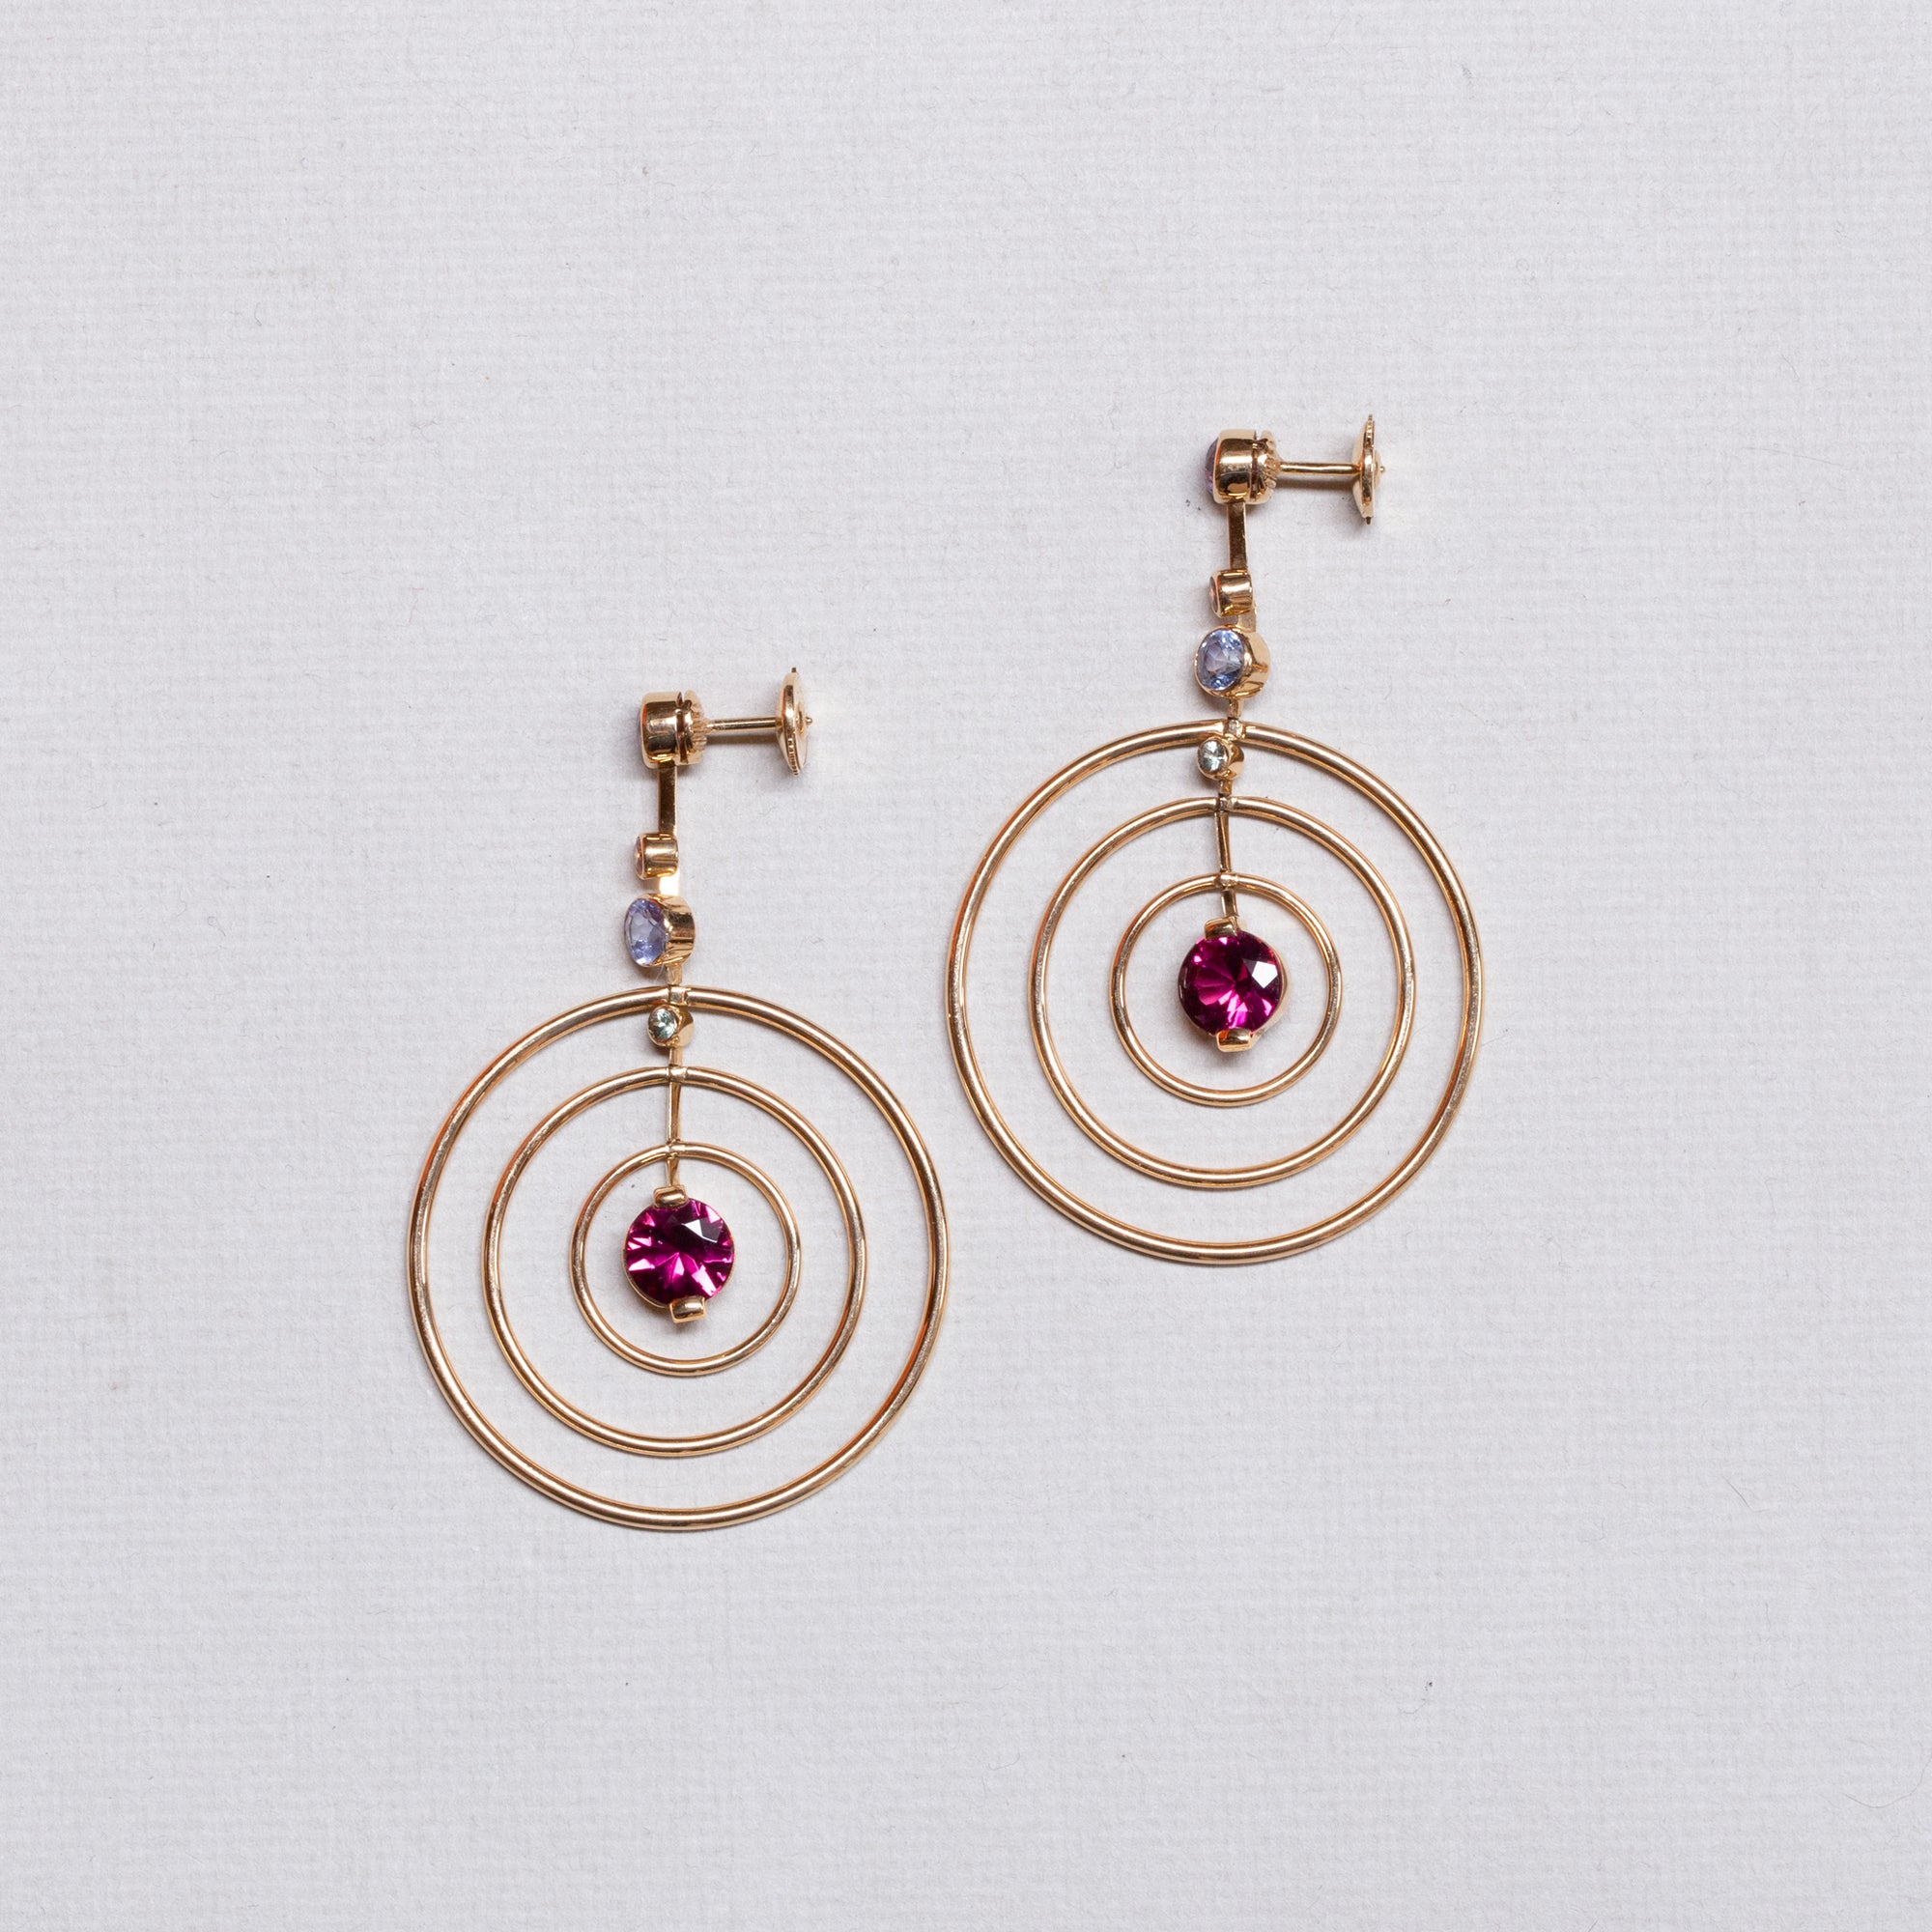 18ct Gold Drop Studs with Amethyst, Tourmaline and Garnet